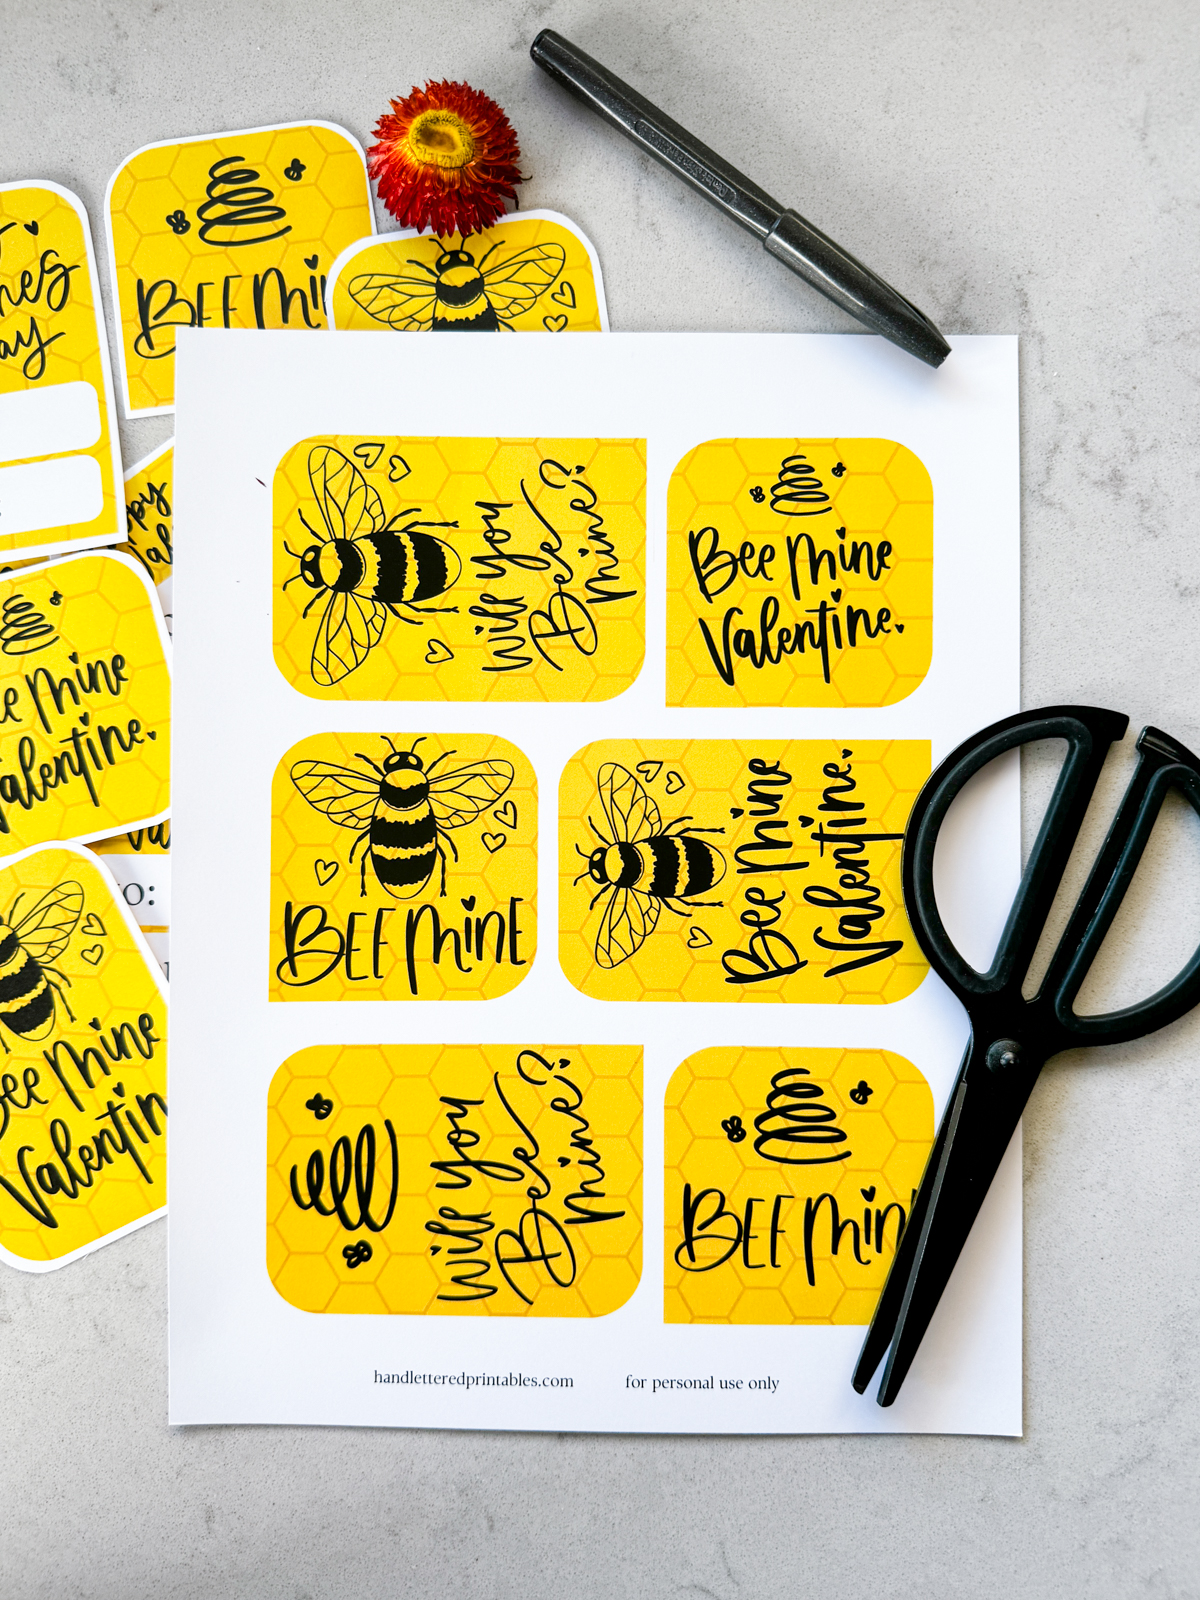 image of printed bee themed valentines cards on marble counter, all ready to be cut out. valentines cards read: bee mine, will you bee mine, and bee mine valentine with illustrations of a bee and of a line art bee hive. reverse has space for names and says 'happy valentines day'. all hand lettered in black ink with yellow honeycomb background